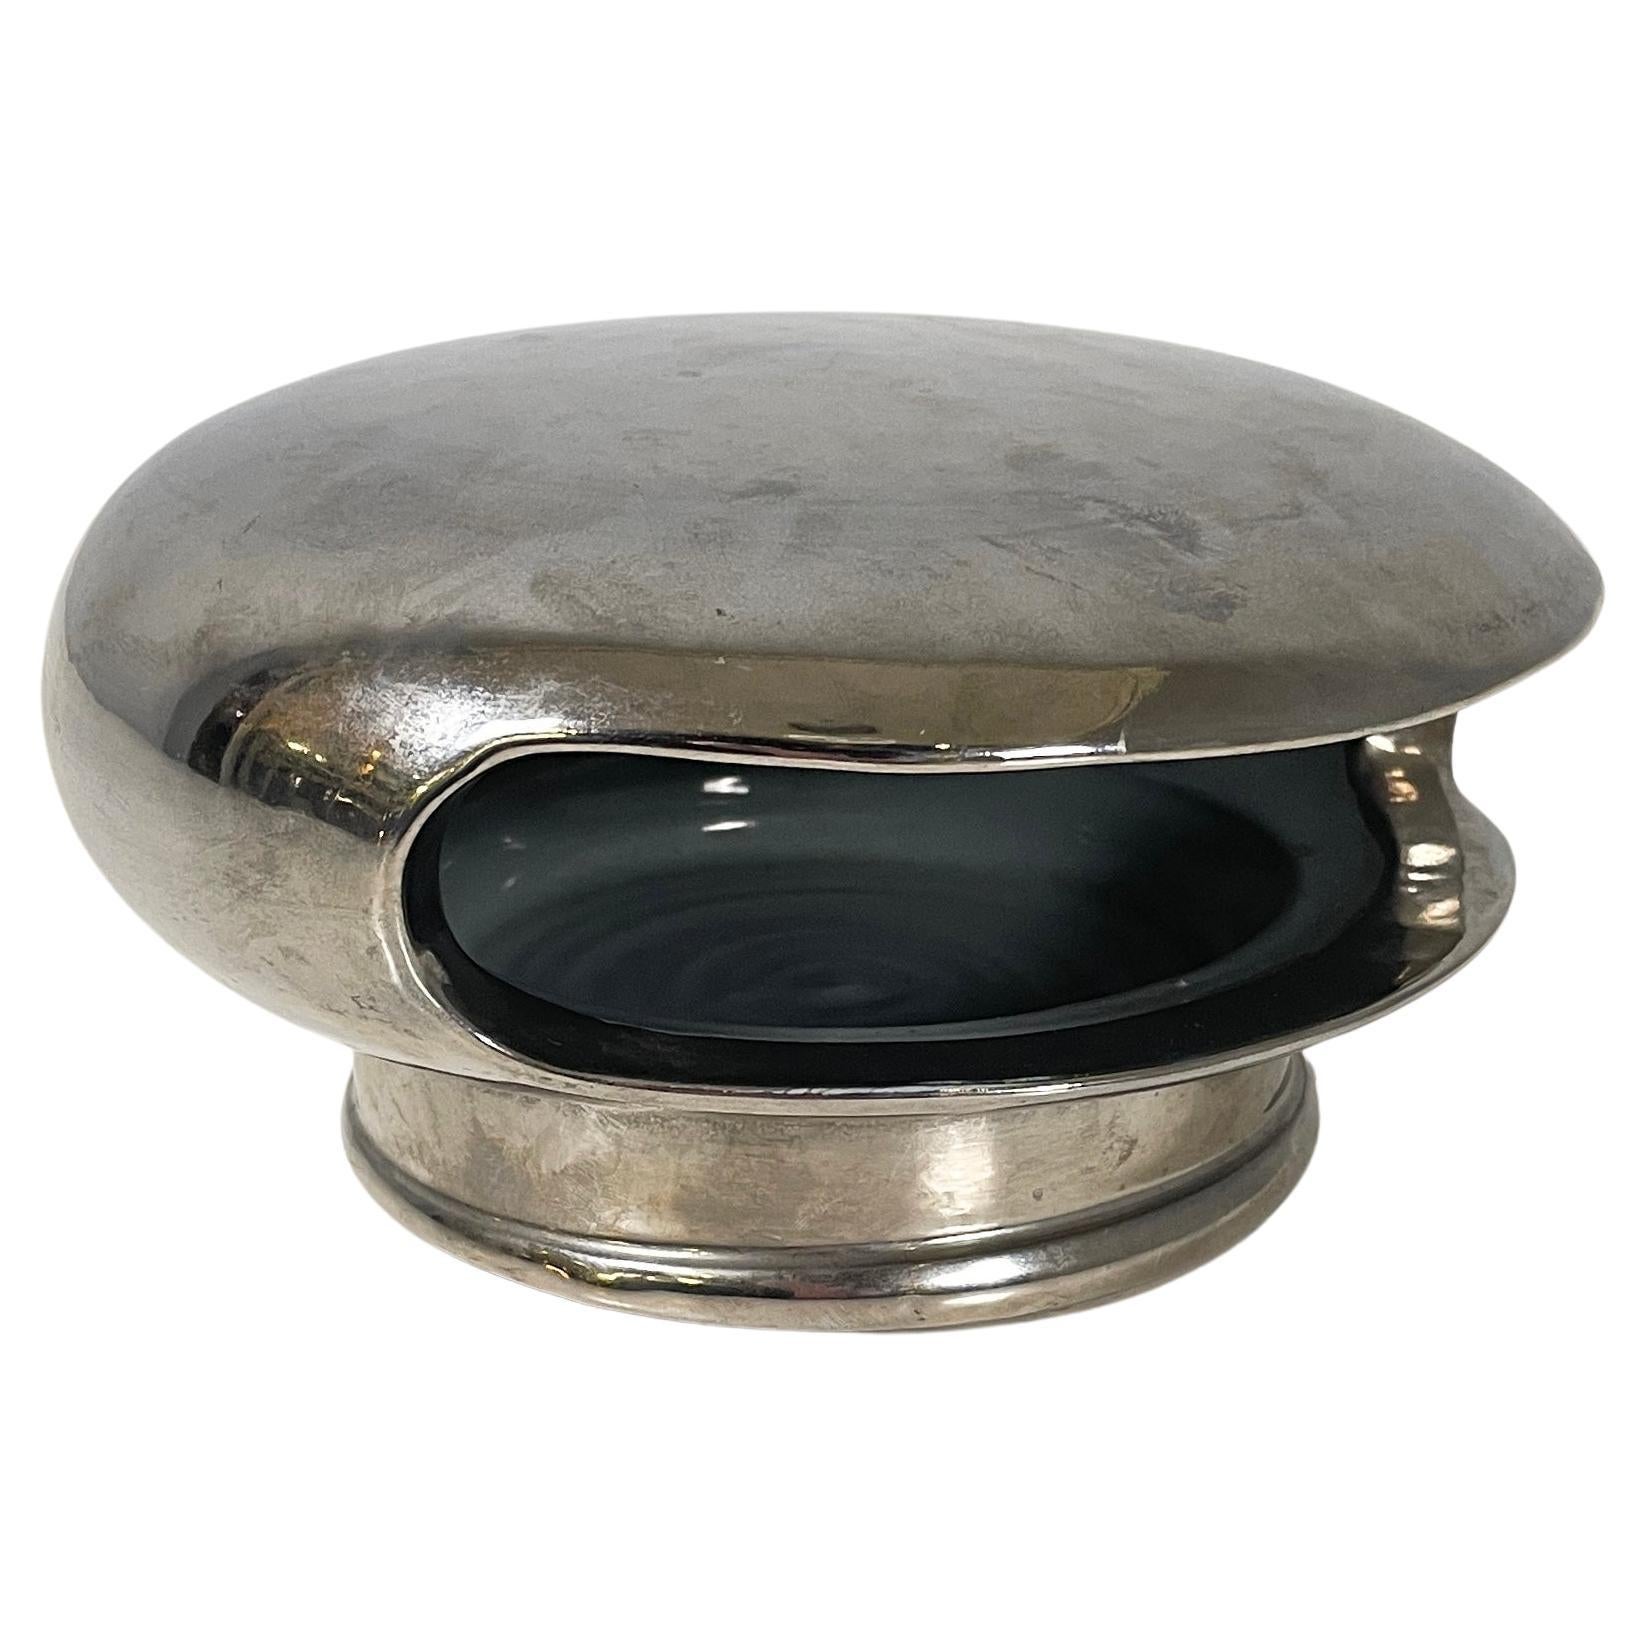 Italian modern Decorative table object or sculpture in silver ceramic, 2000s For Sale